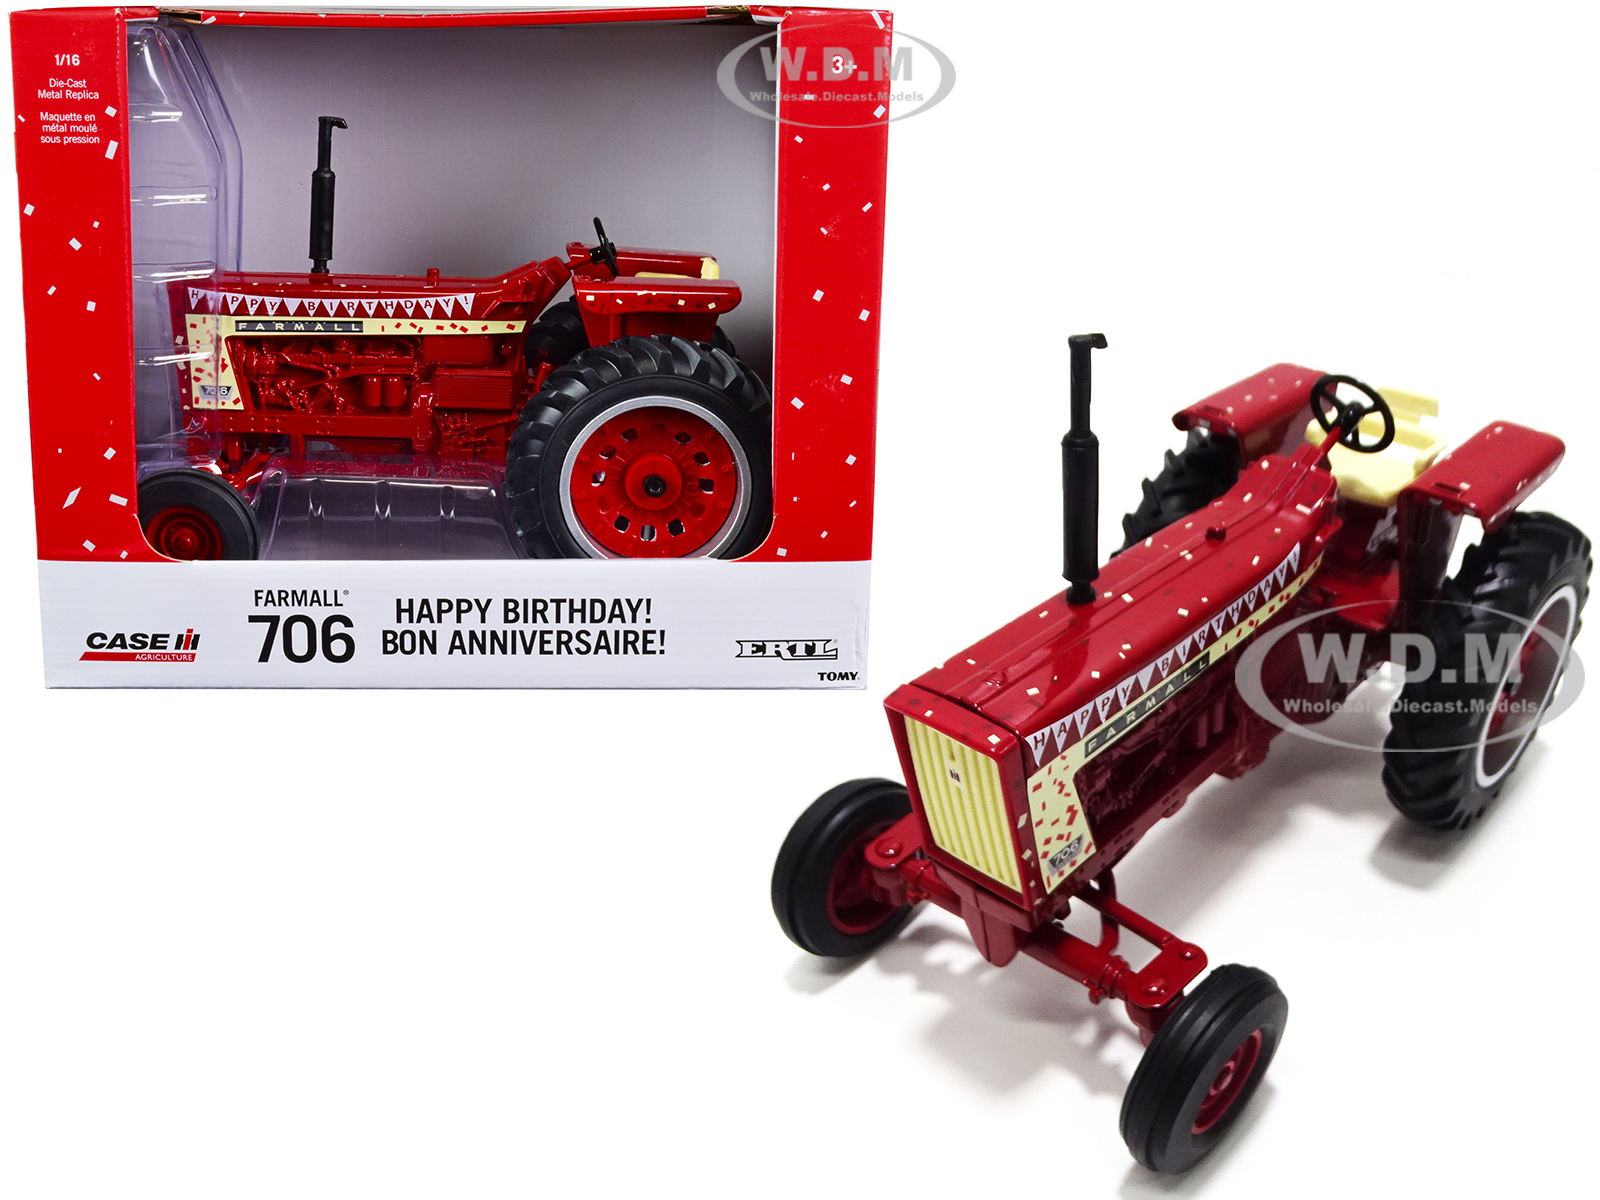 Farmall 706 Wide Front Tractor Red Happy Birthday Edition Case IH Agriculture Series 1/16 Diecast Model By ERTL TOMY